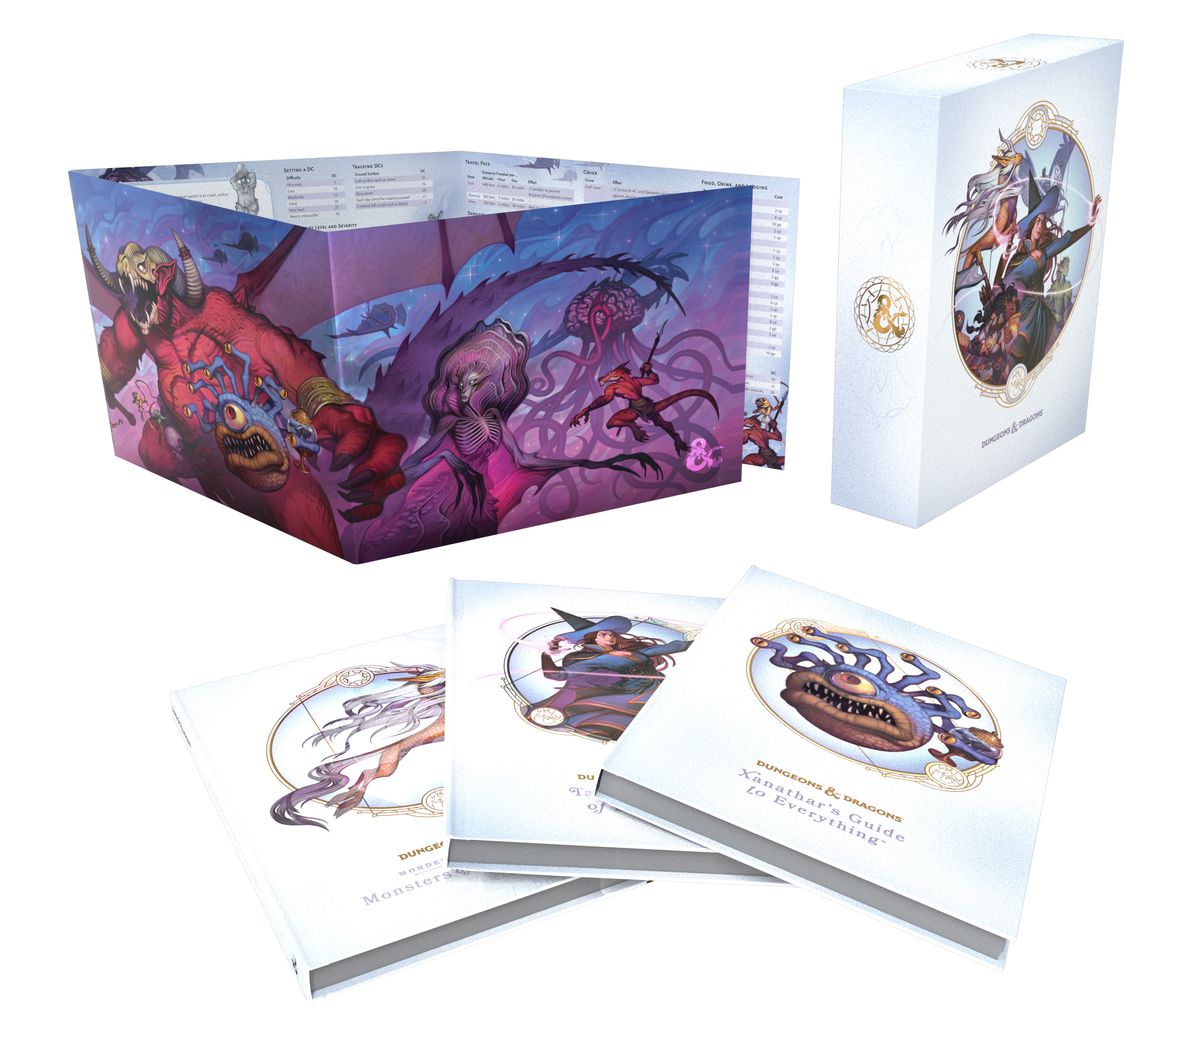 A render of the collector’s edition of Rules Expansion gift set.